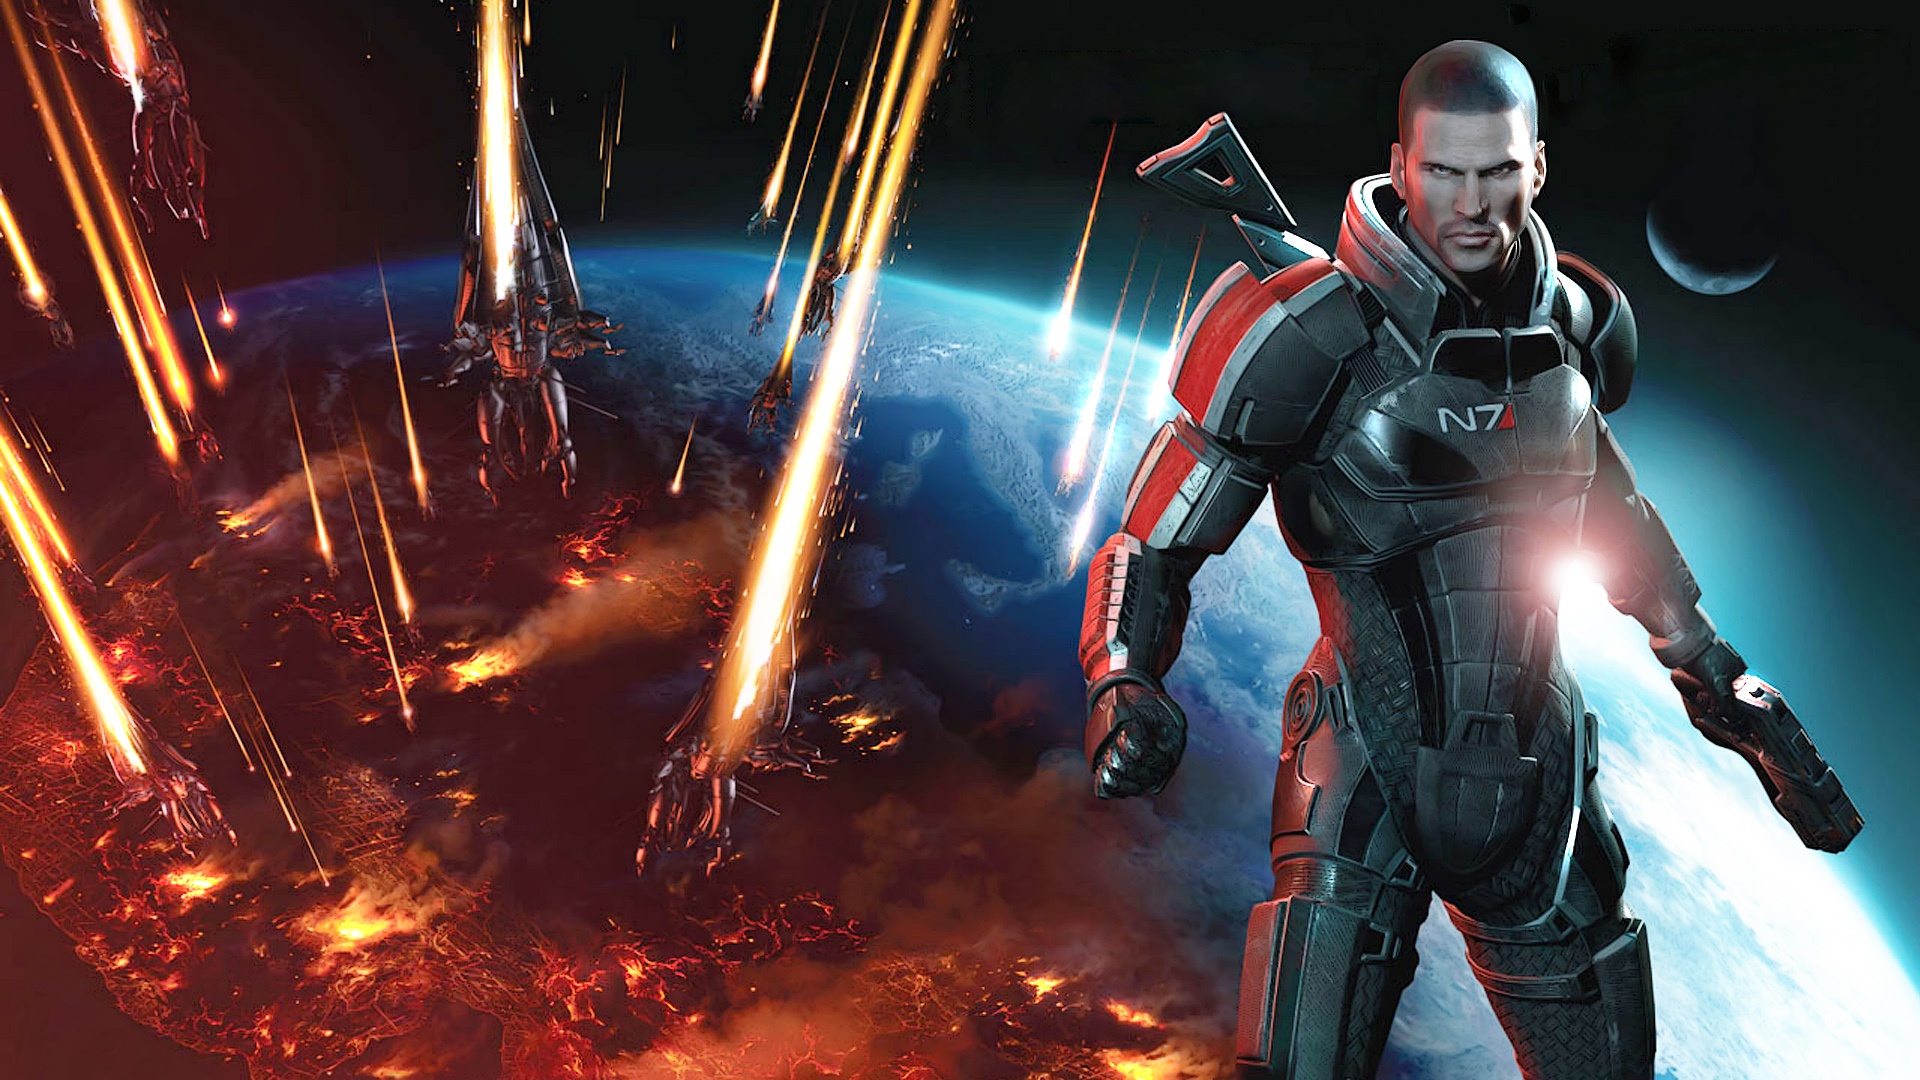 Commander Shepard from Mass Effect 3 in action.